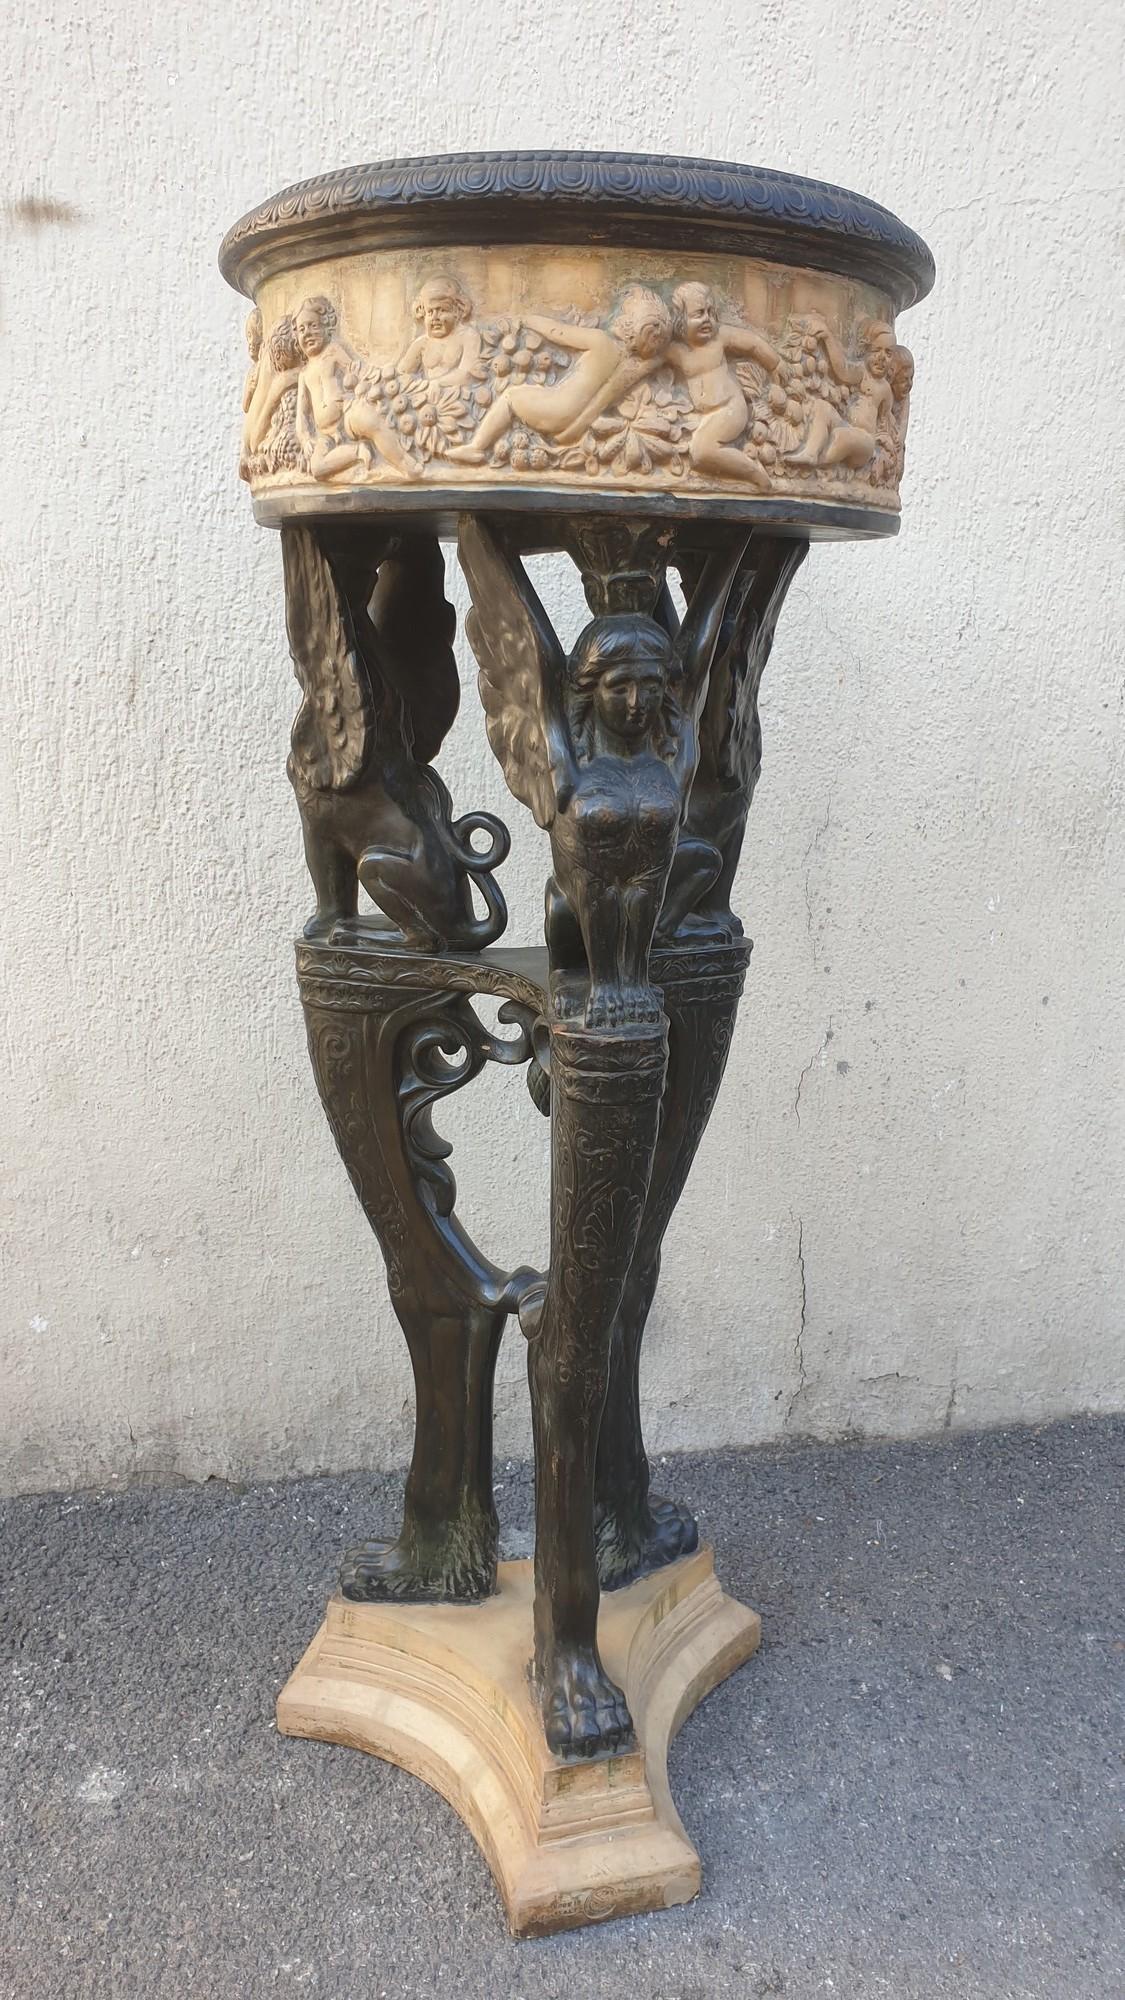 Athenian or planter in patinated terracotta, with decor inspired by antiquity / Grand Tour: feet in the shape of sphinxes, frieze of putti in the middle of flowers and fruits

Planter made in Italy, stamps by Dini & Celai, in Tuscany

Good condition